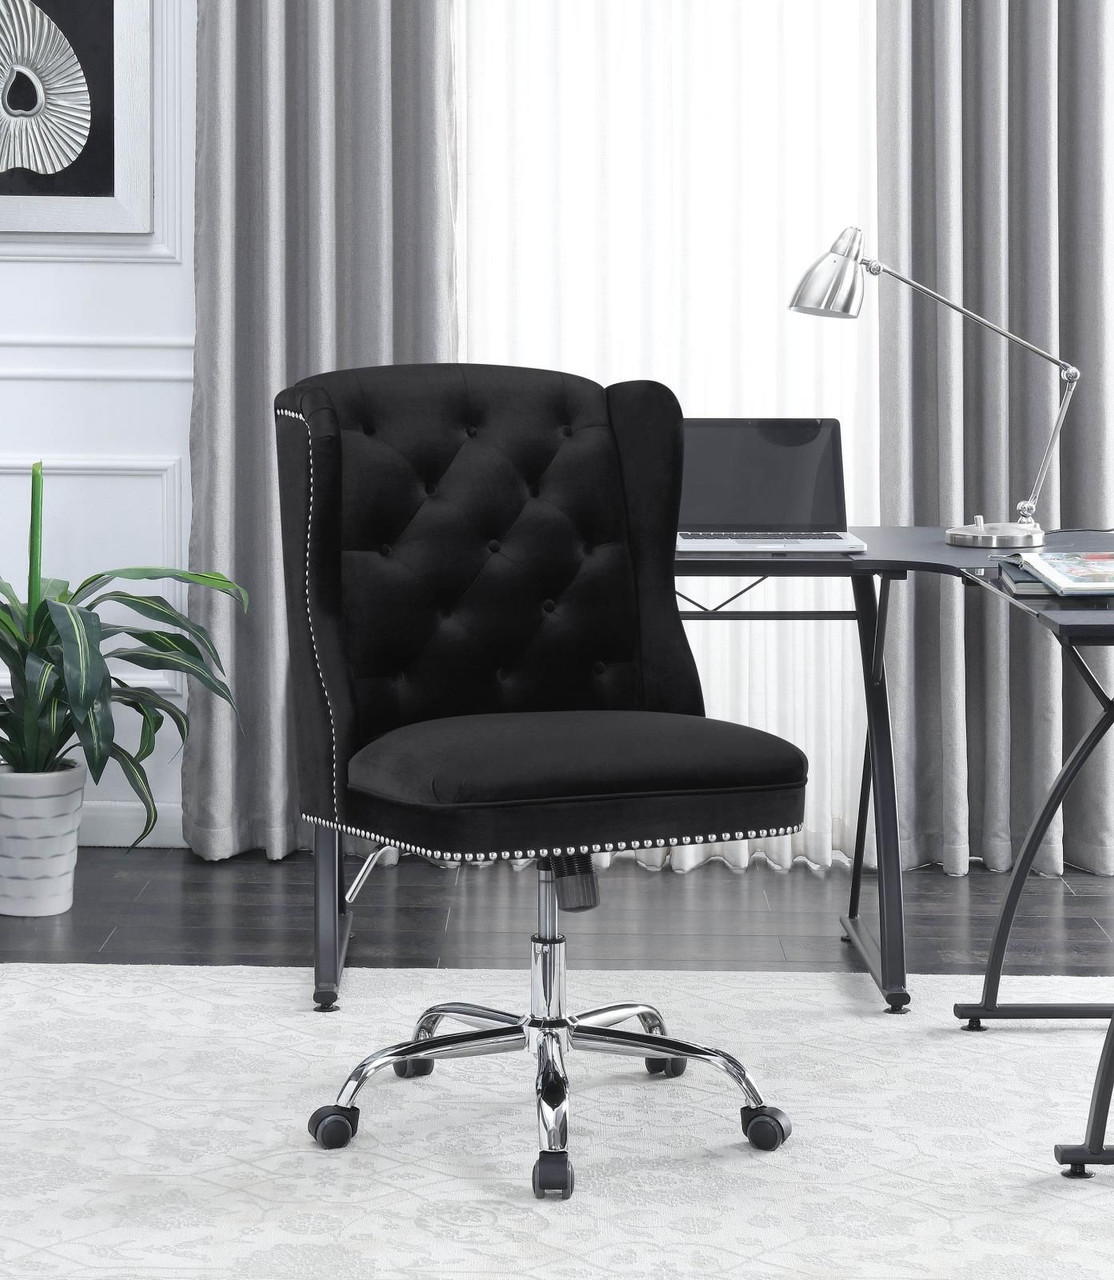 Cruz Upholstered Office Chair with Padded Seat Grey and Chrome